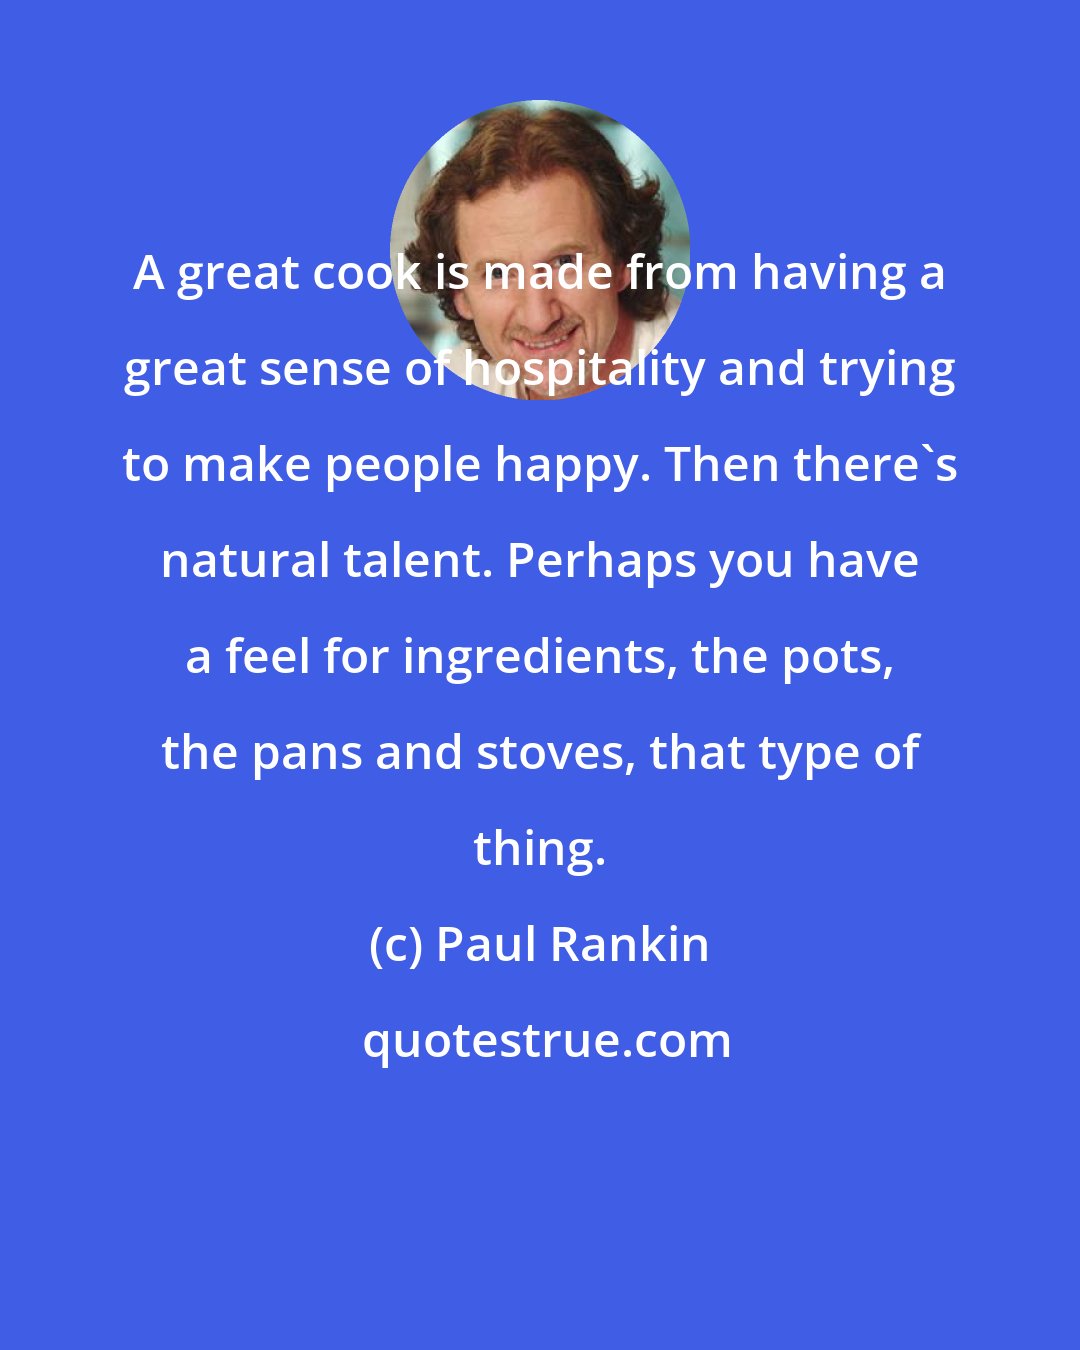 Paul Rankin: A great cook is made from having a great sense of hospitality and trying to make people happy. Then there's natural talent. Perhaps you have a feel for ingredients, the pots, the pans and stoves, that type of thing.